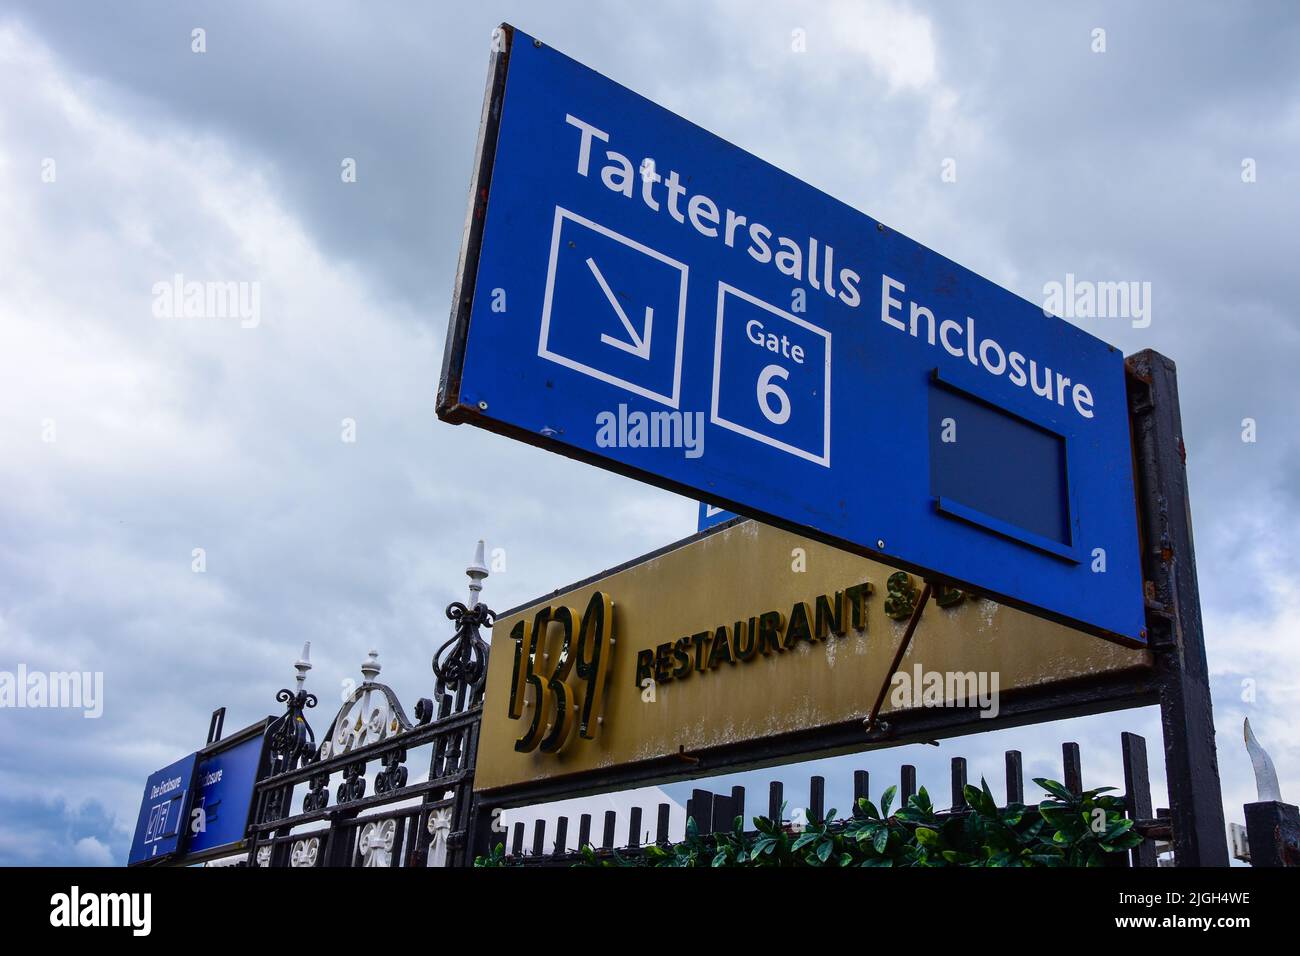 Chester, UK: Jul 3, 2022: A sign marks the entrance to the Tattersalls Enclosure and 1539 Restaurant at Chester Racecourse. This is the largest enclos Stock Photo